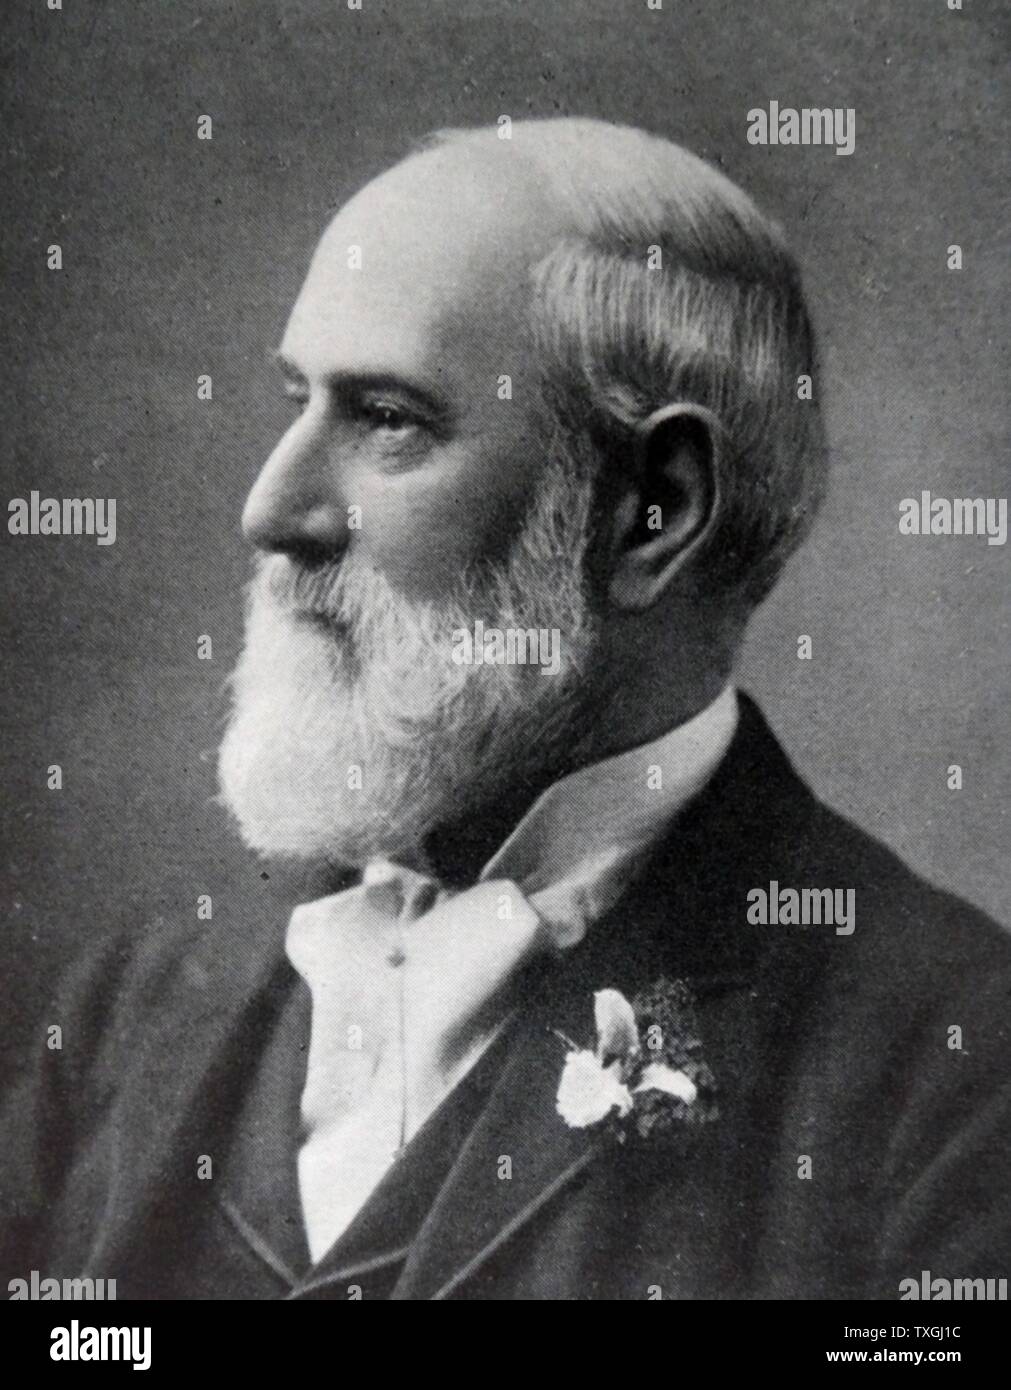 Photographic portrait of Sir James Reckitt, 1st Baronet (1833-1924) a founder of the household products company Reckitt and Sons. Dated 20th Century Stock Photo